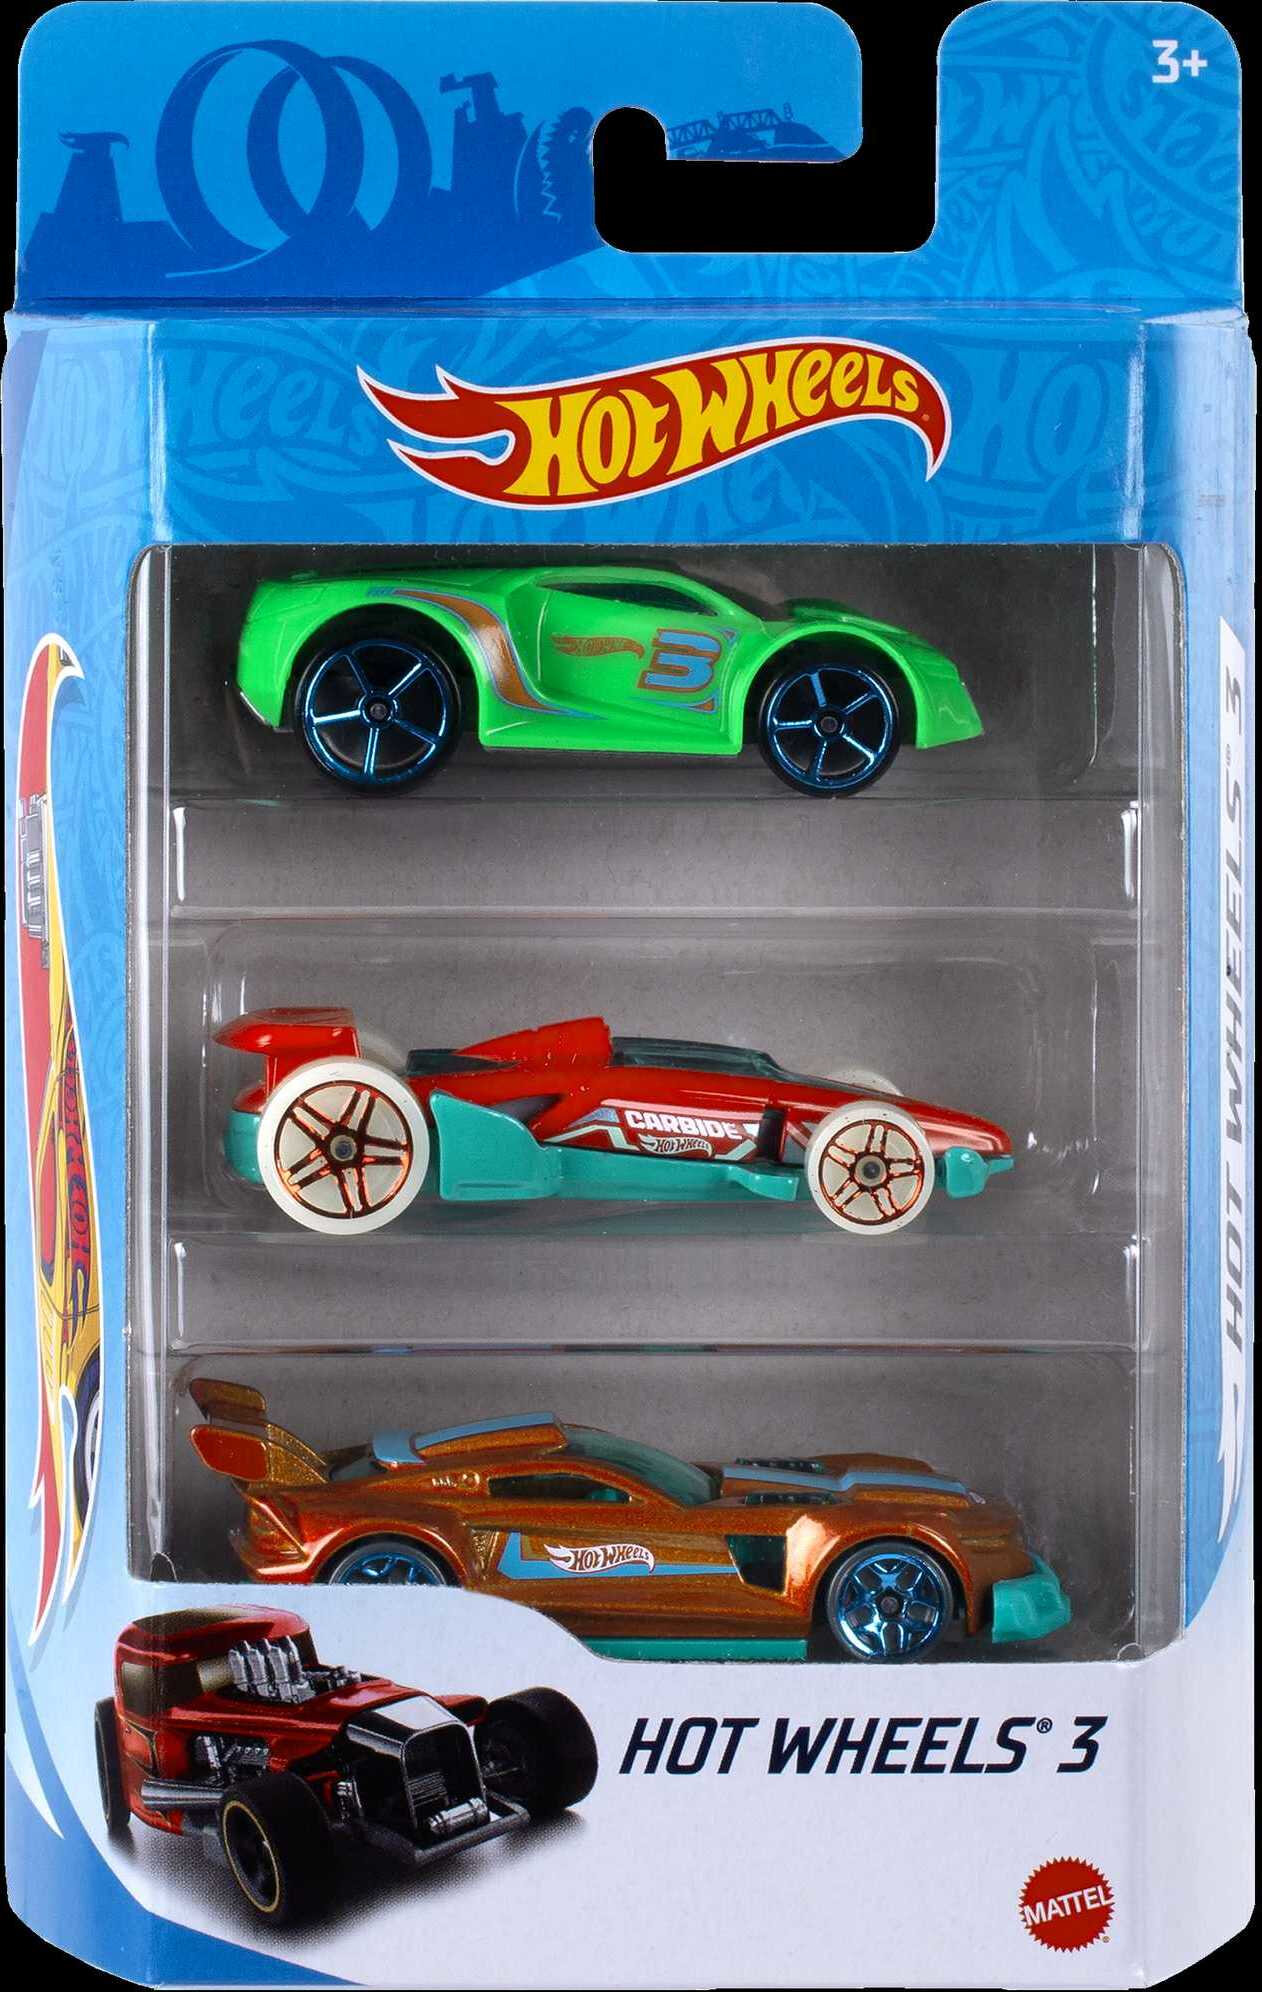 Hot Wheels 3-Car Pack, Multipack of 3 Hot Wheels Vehicles, Gift for Kids 3 Years & Up (Styles May Vary) - image 3 of 6